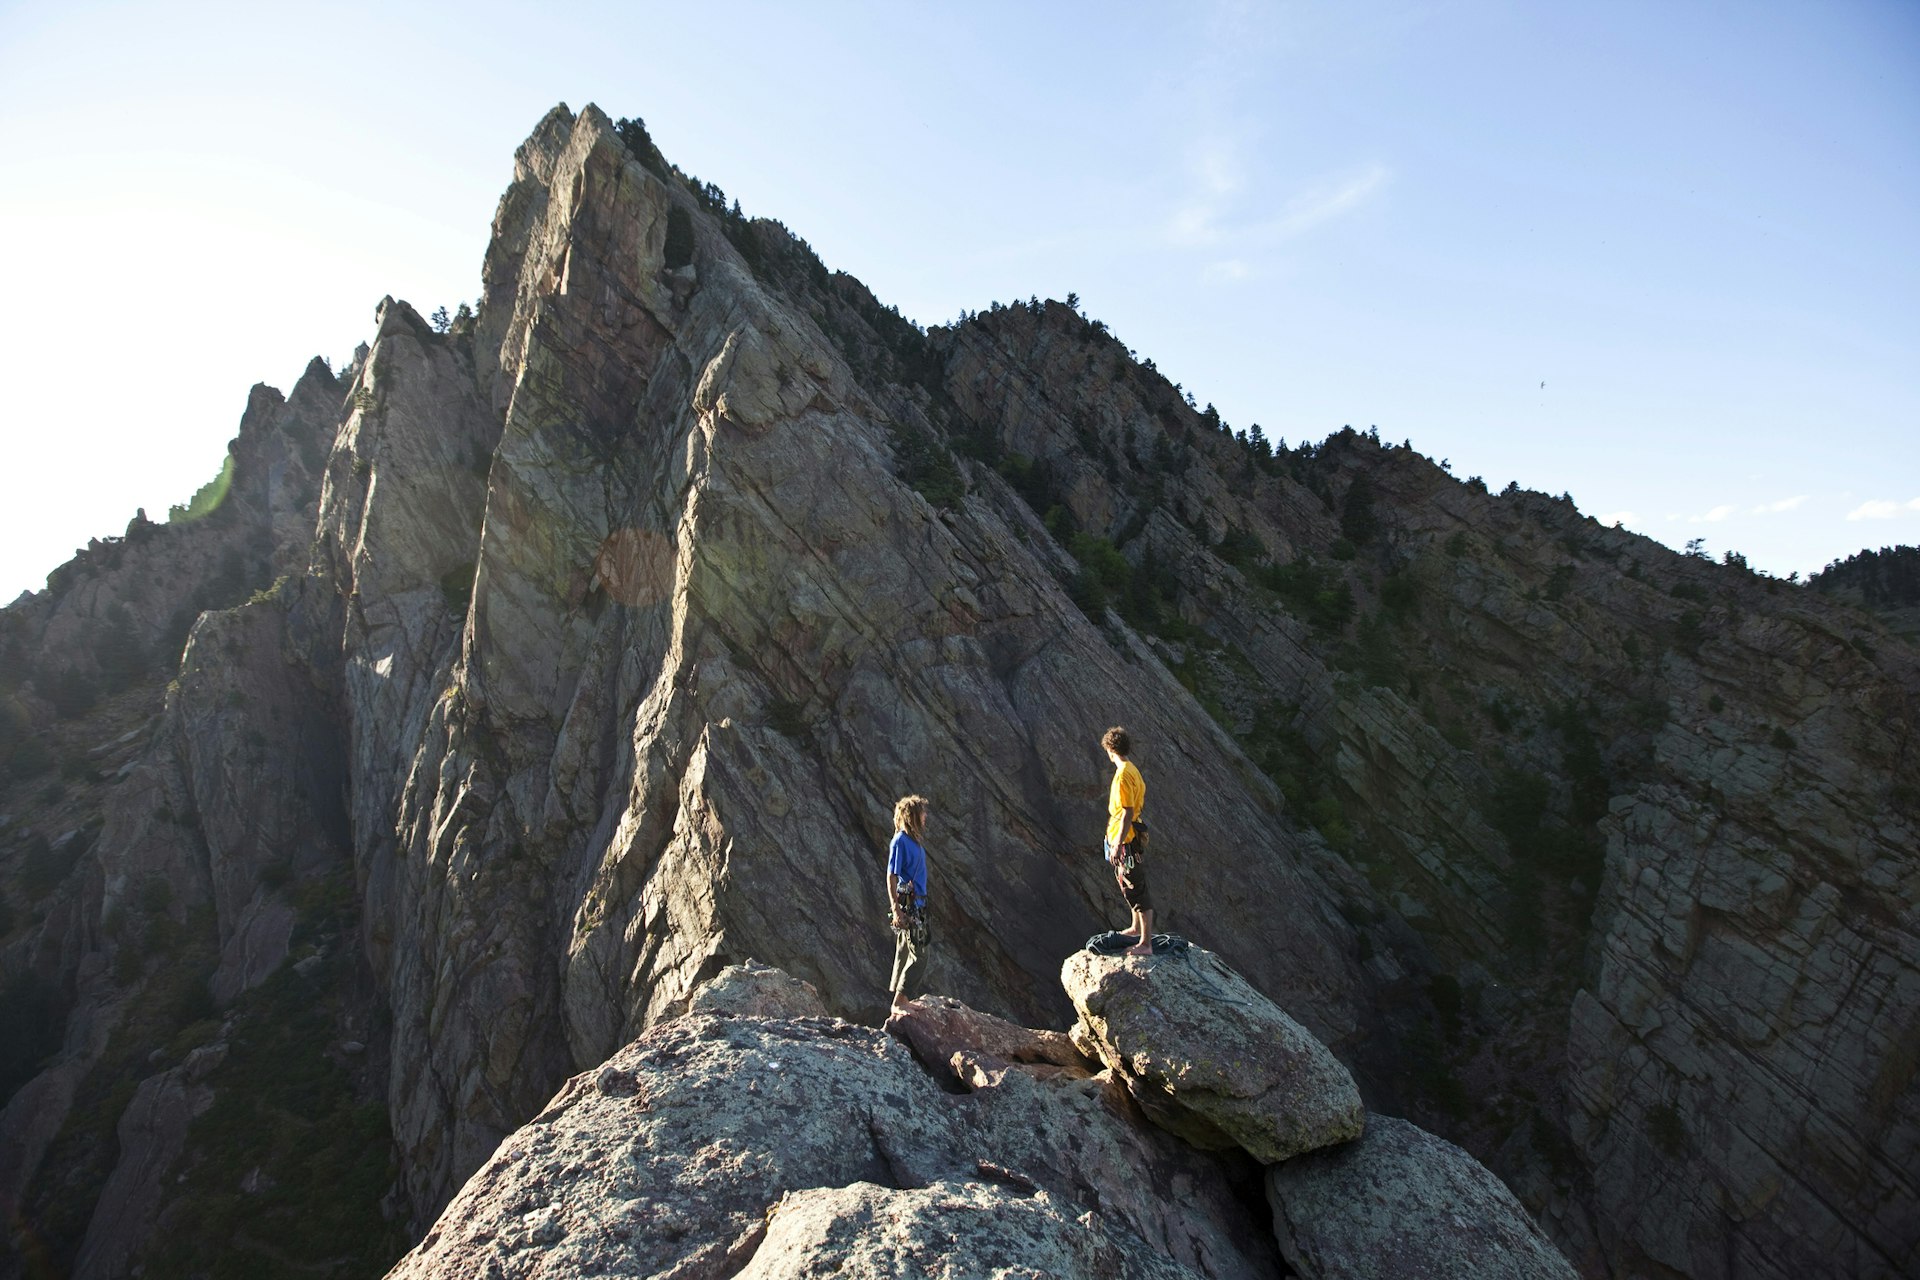 Two young men stand triumphantly on top of a huge rock that they have climbed